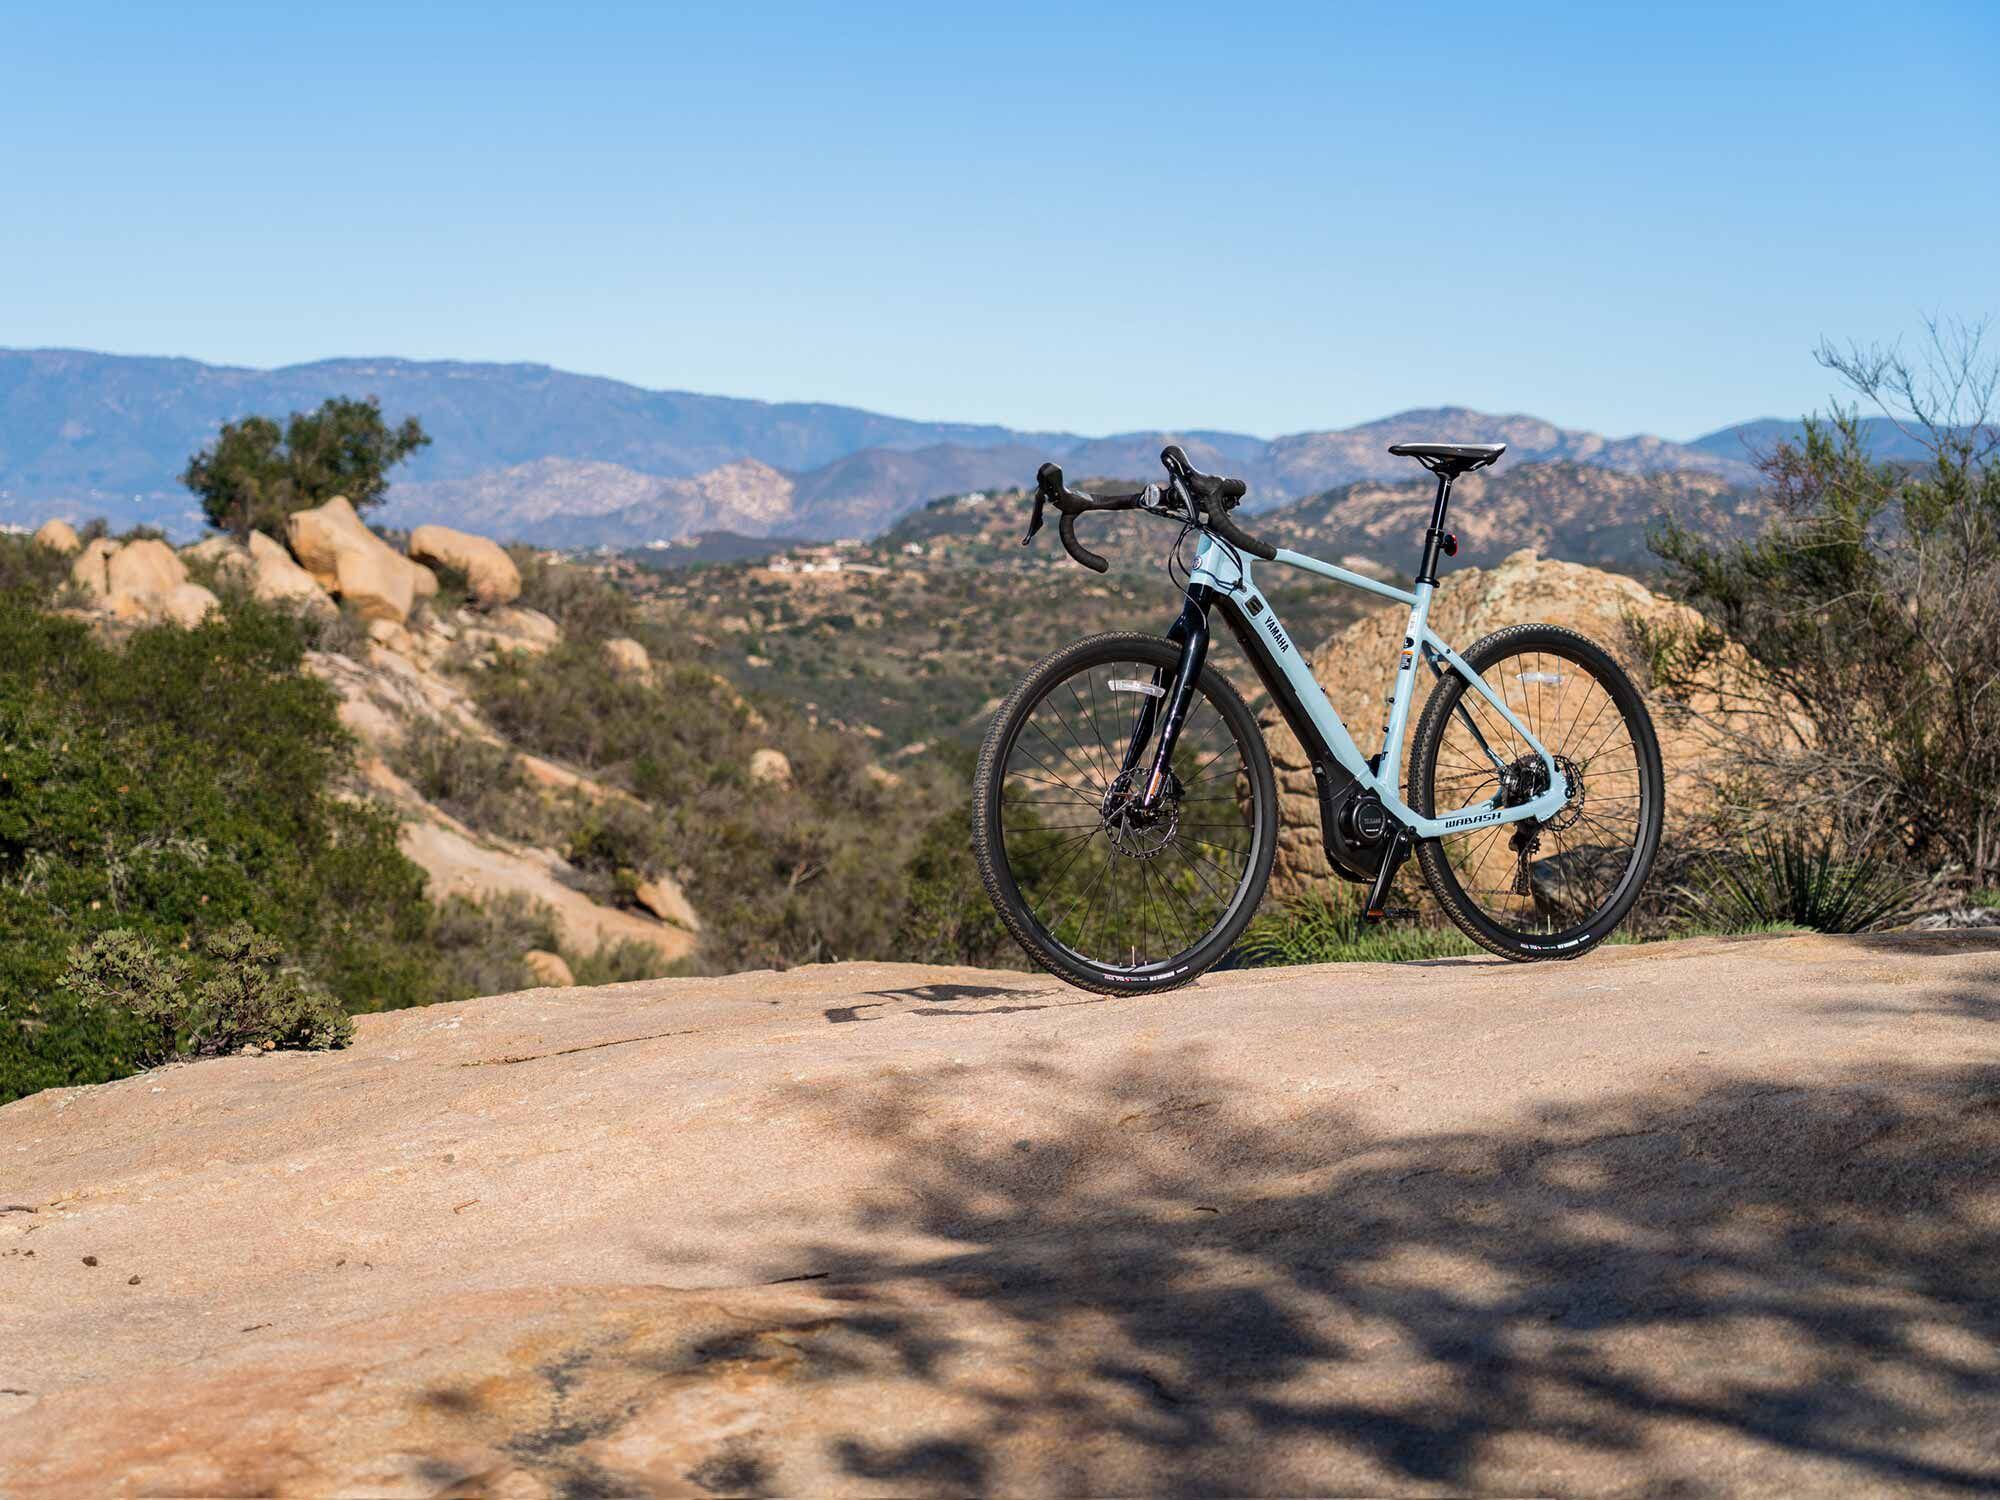 The Yamaha Bicycles Wabash RT is a 700c wheel-equipped pedal-assist gravel bike designed for powersport riders who want to mix a bit of fun with exercise.